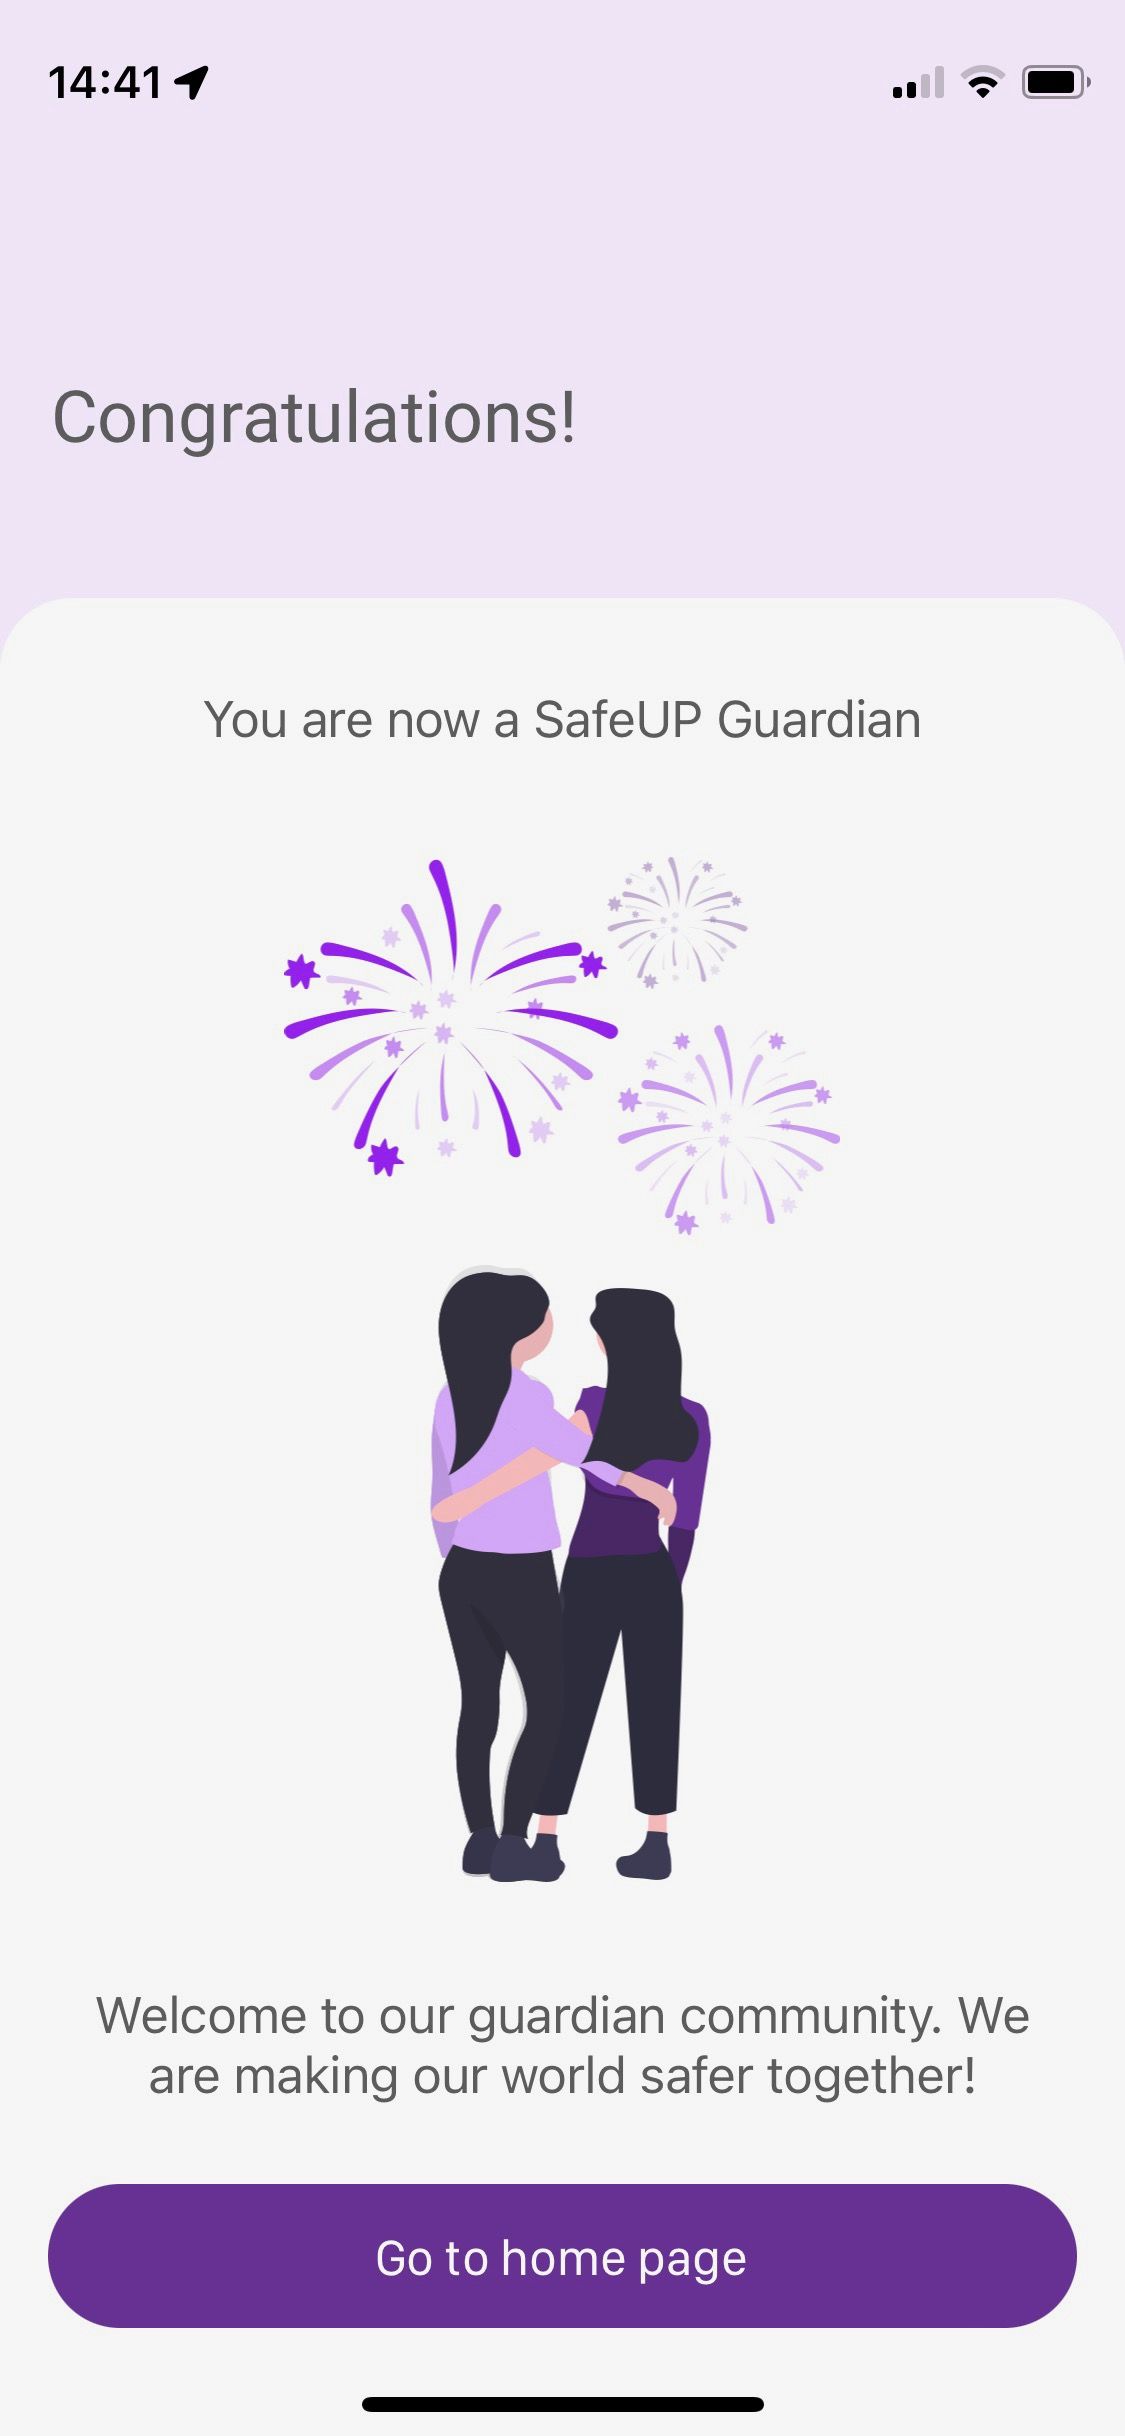 Screenshot of SafeUP app showing completed guardian training